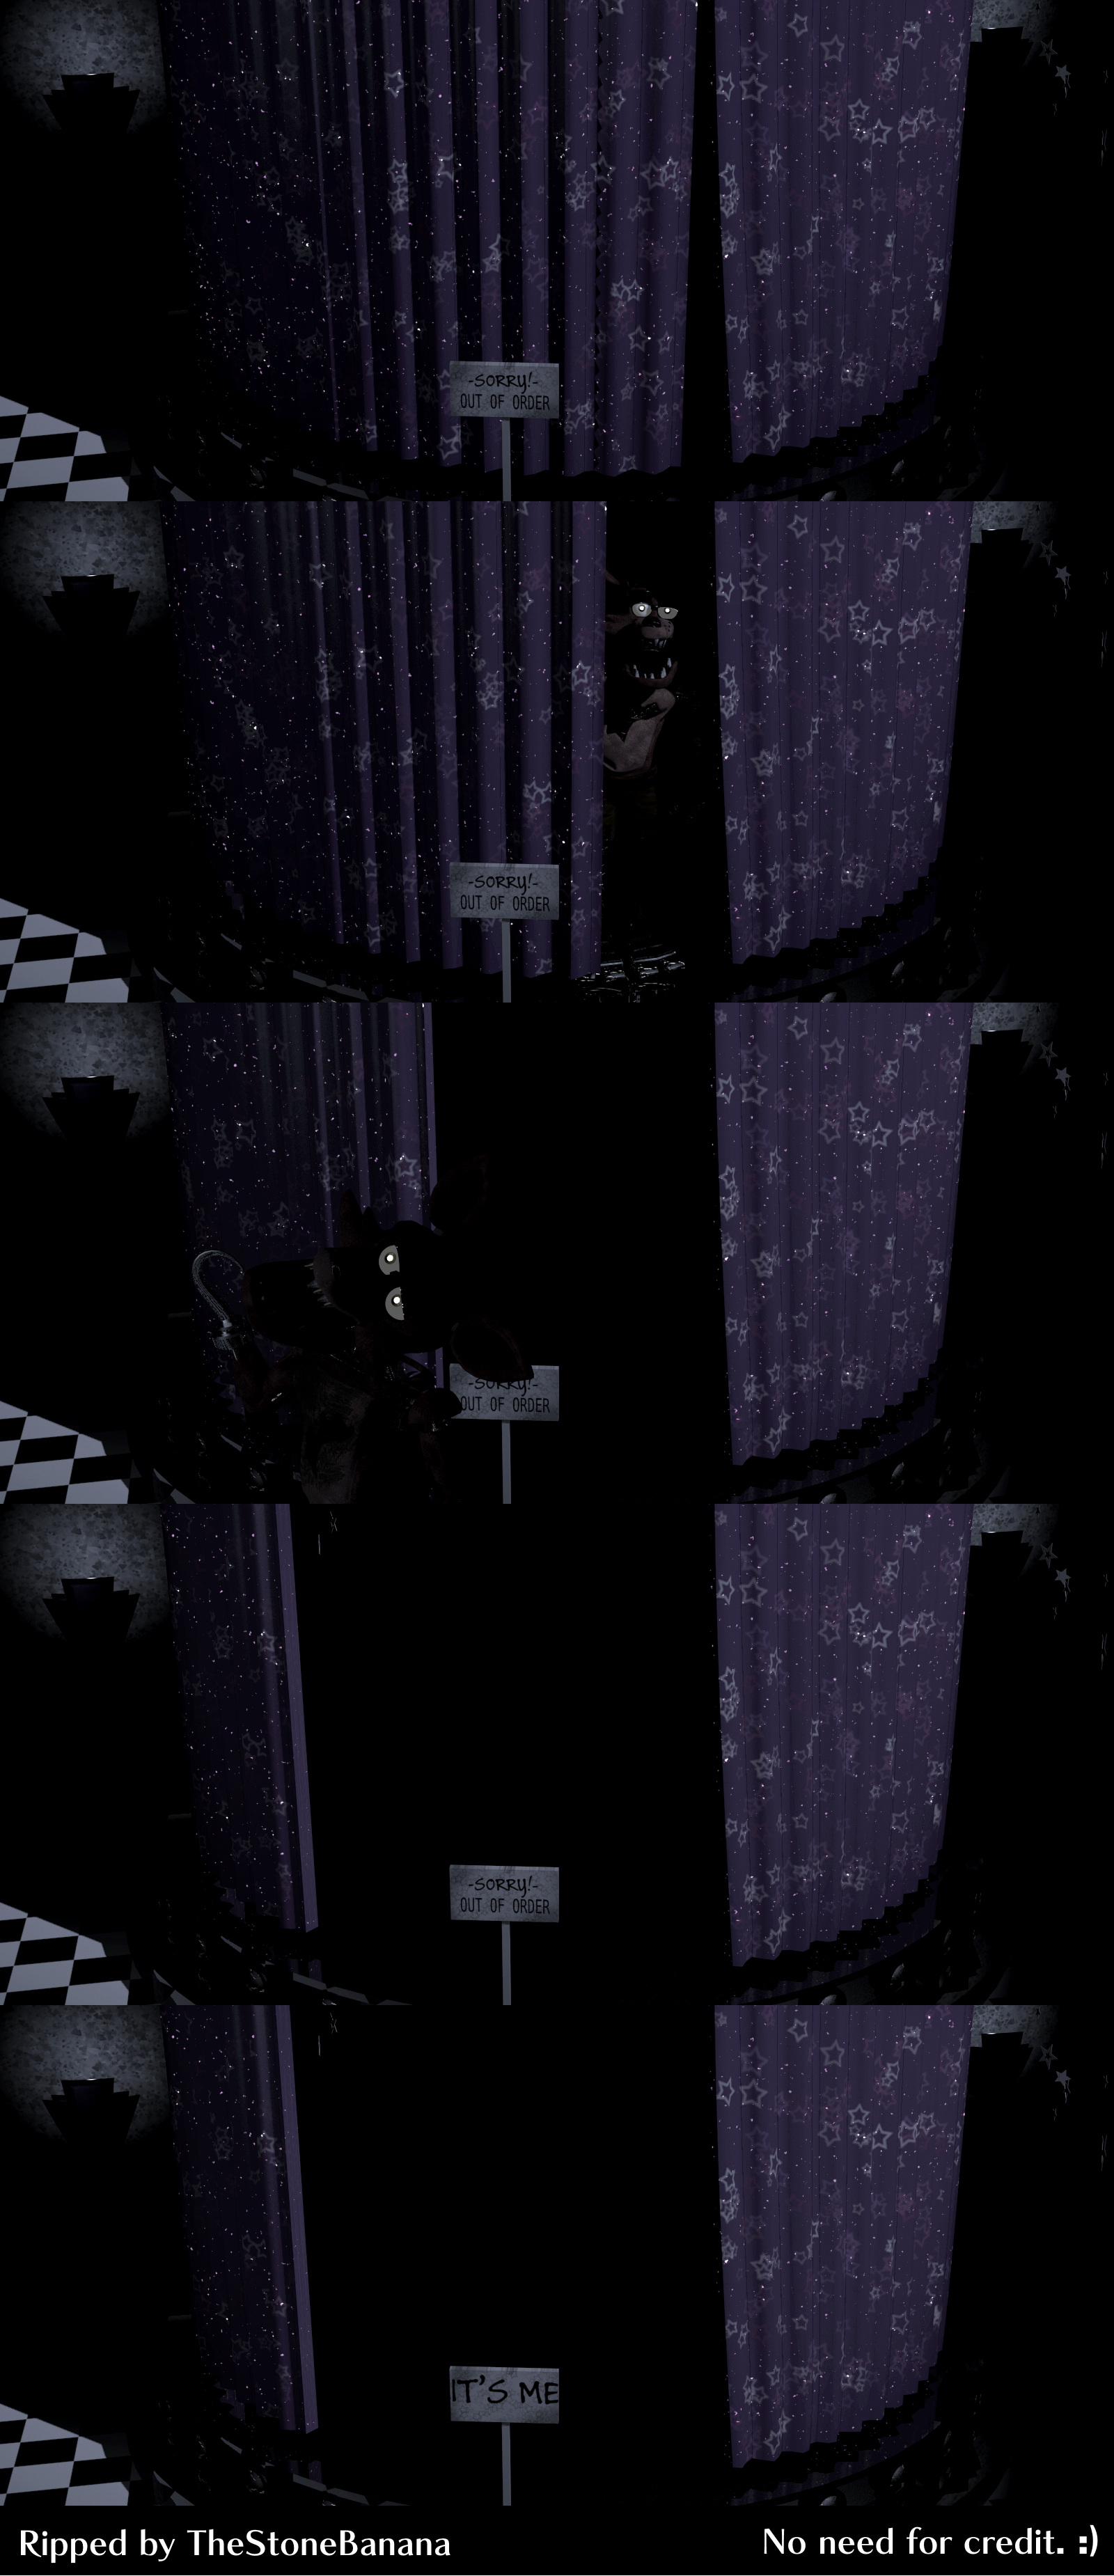 Five Nights at Freddy's - Pirate's Cove